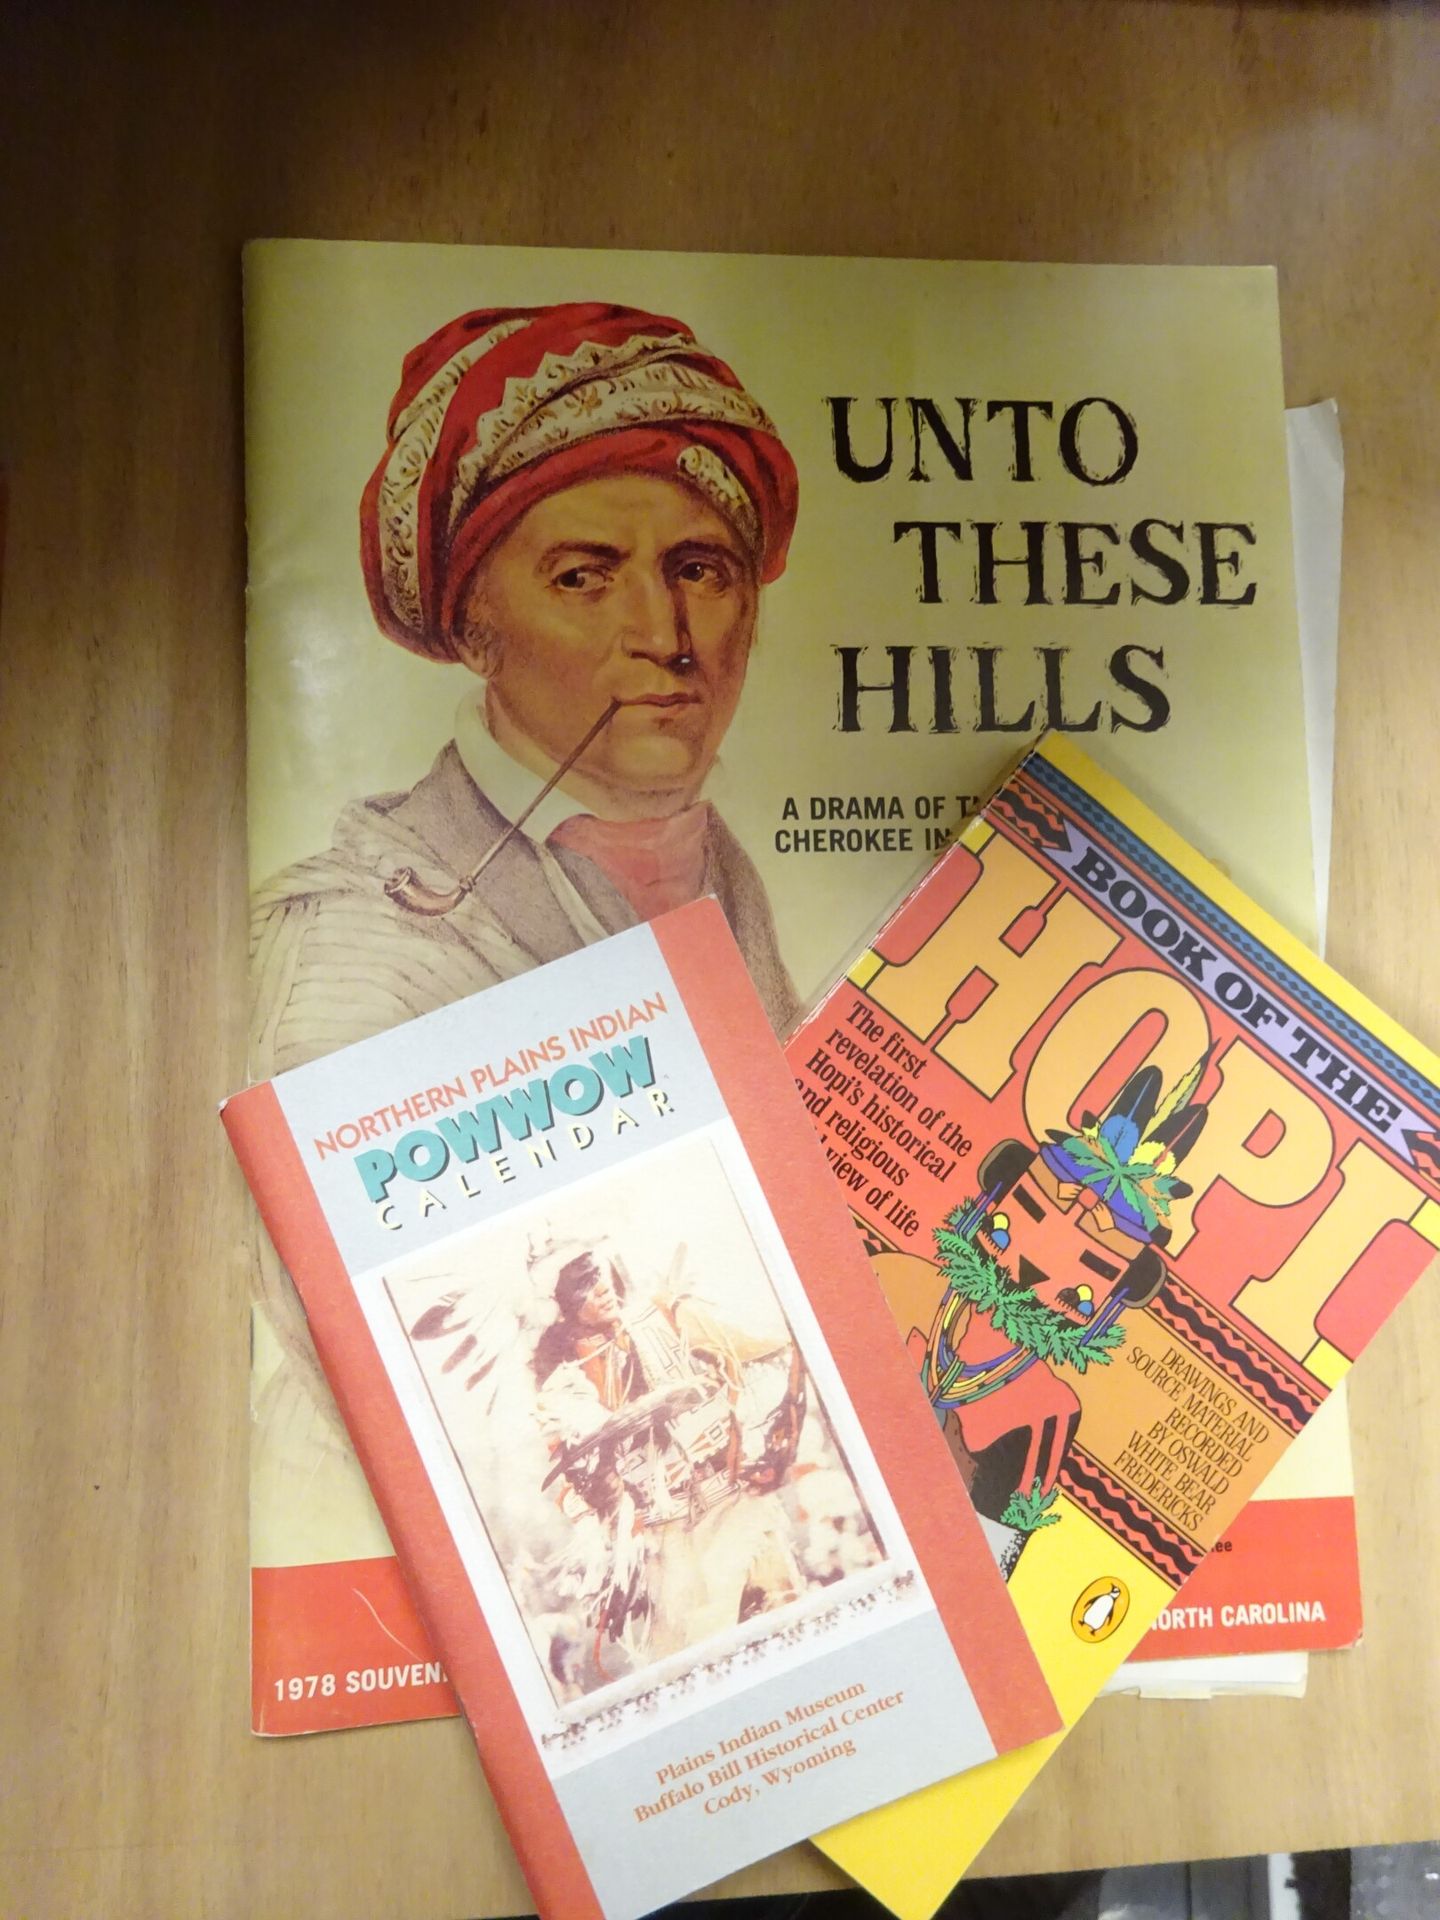 Null Lot including : 

- Unto these hills

1 vol. In-folio, paperback.

- Northe&hellip;